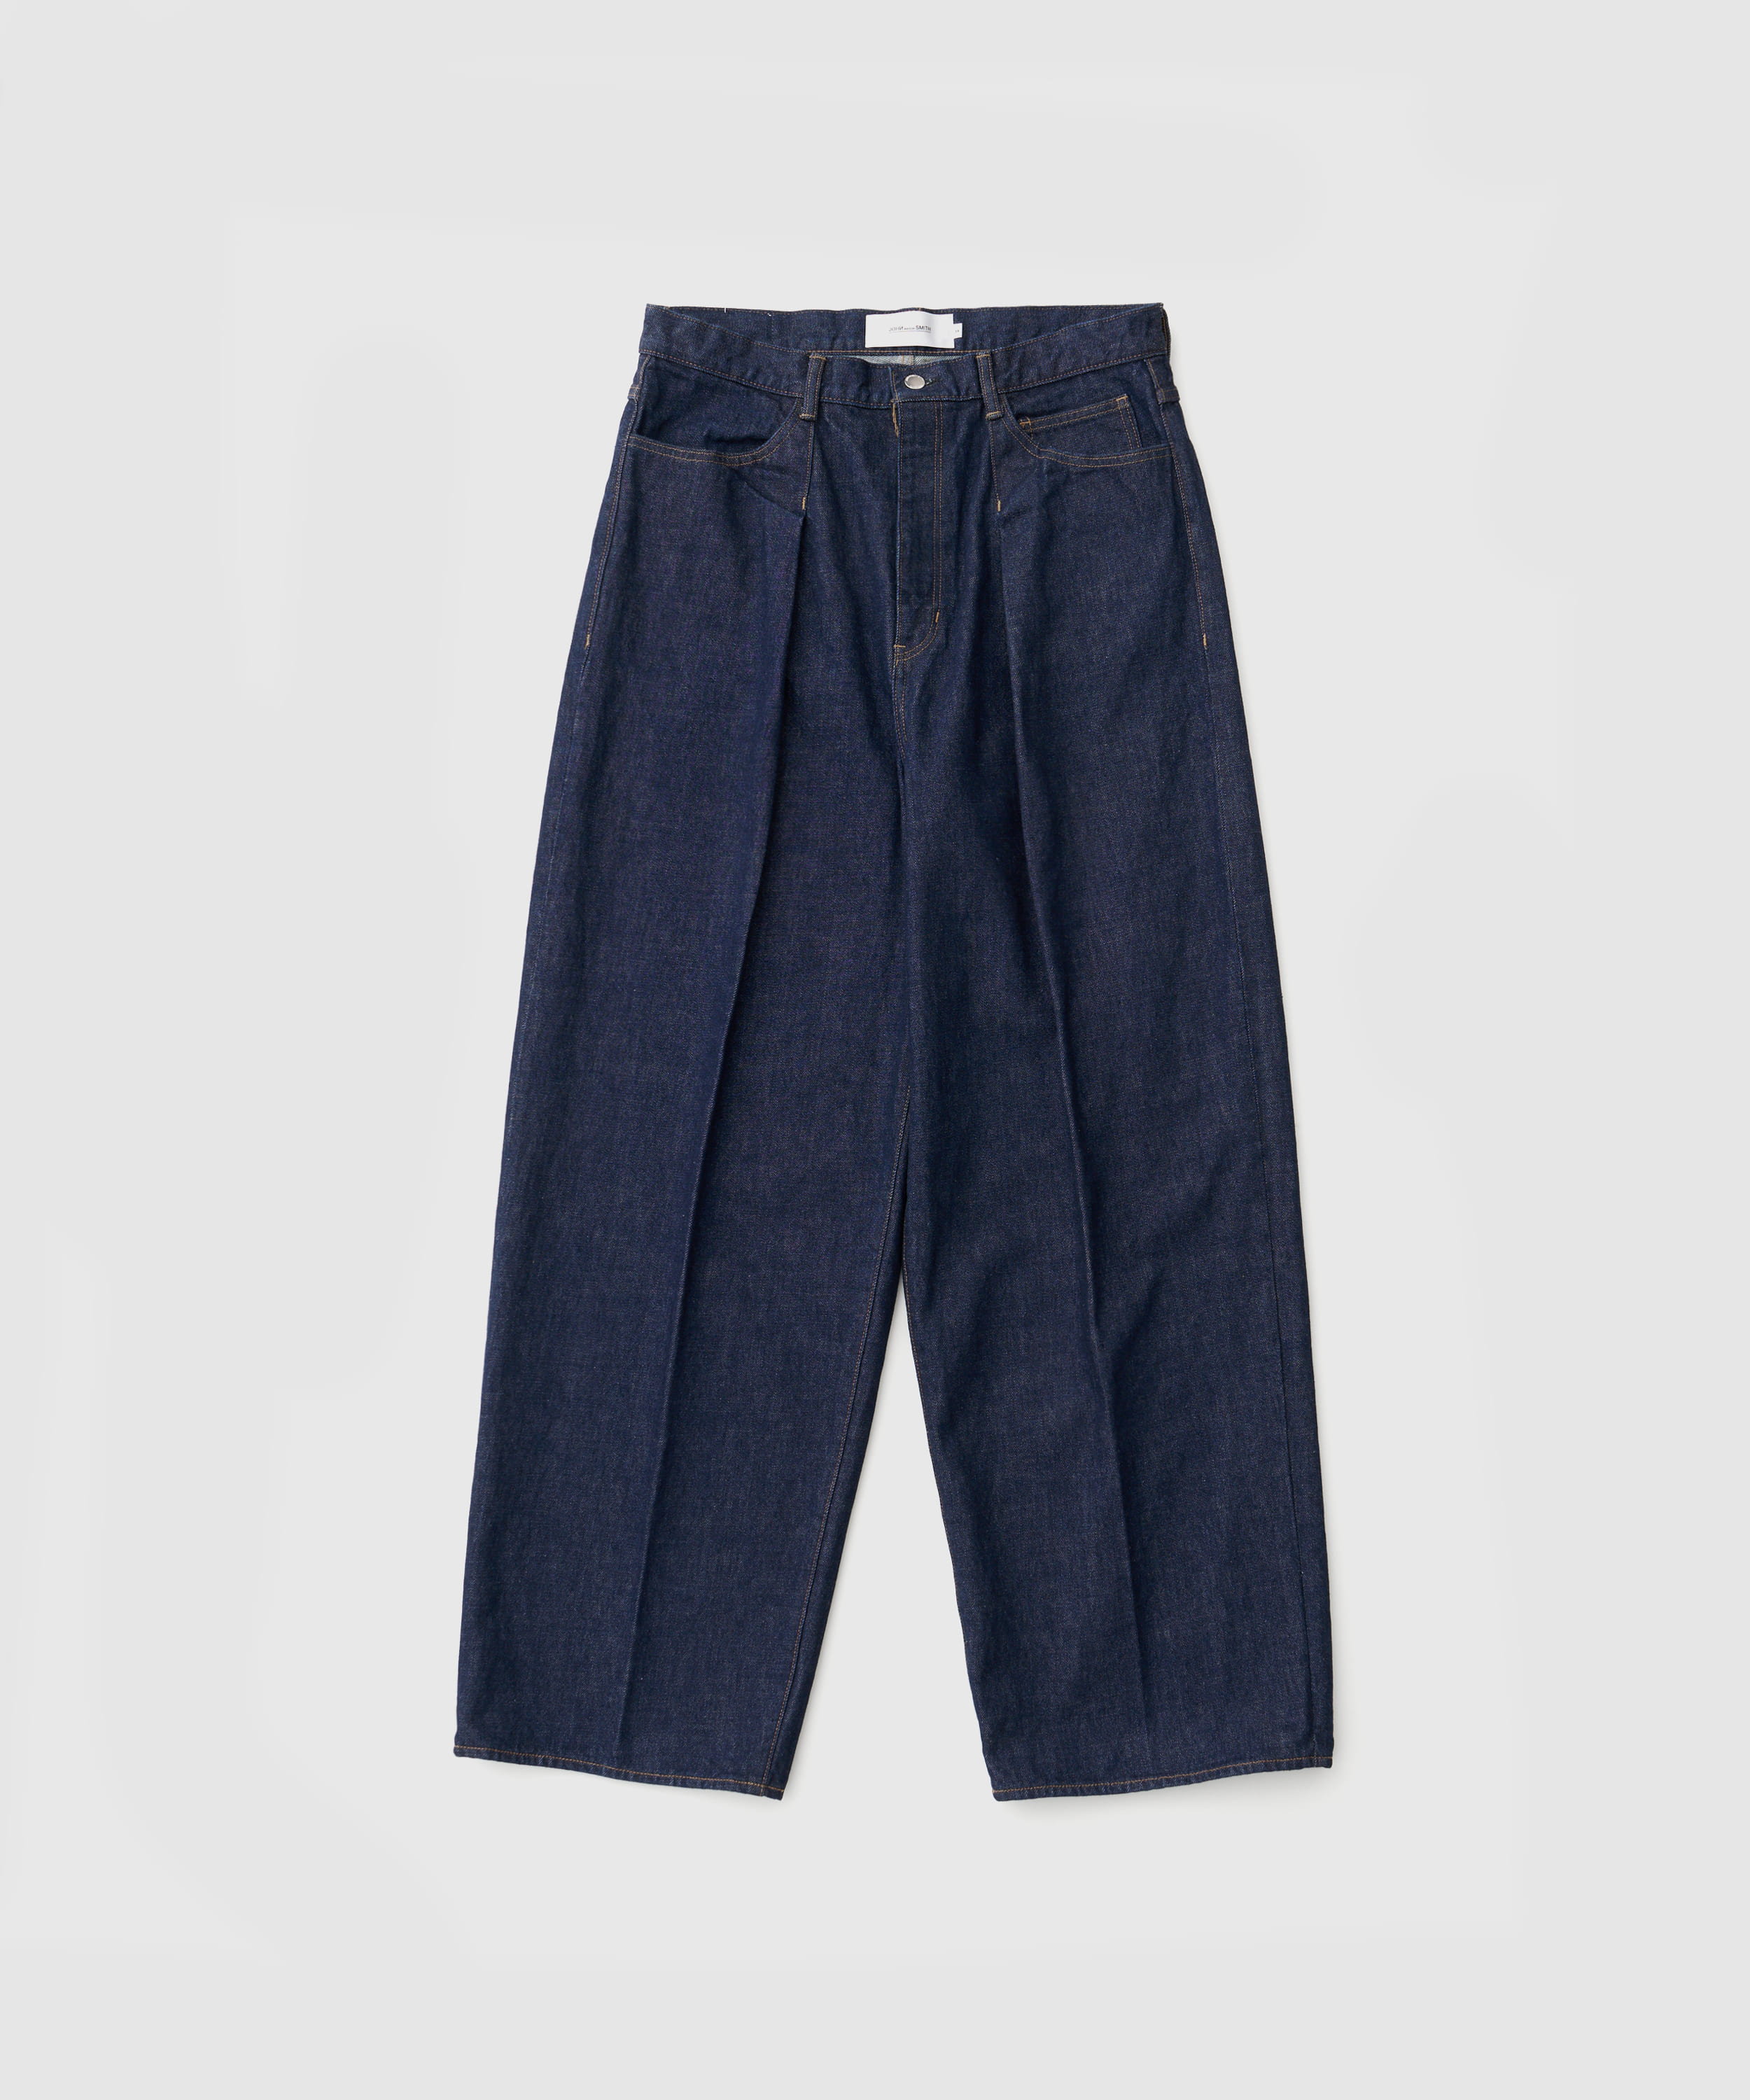 14.5oz Denim In Tuck Comfort Tapered Pants (One Wash)